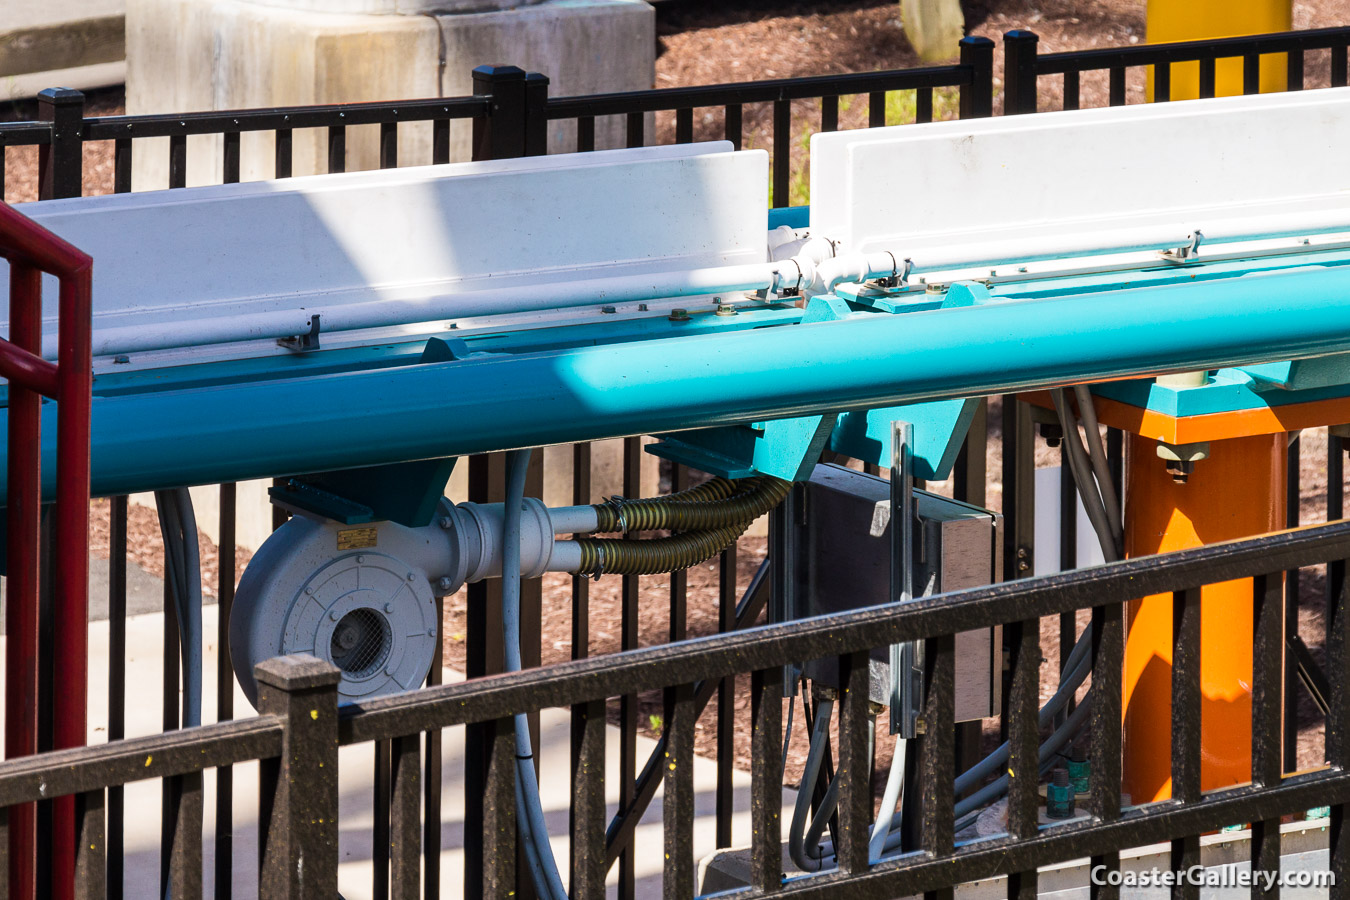 Pictures of the Linear Synchronous Motors and cooling system on the Tempesto roller coaster in Busch Gardens